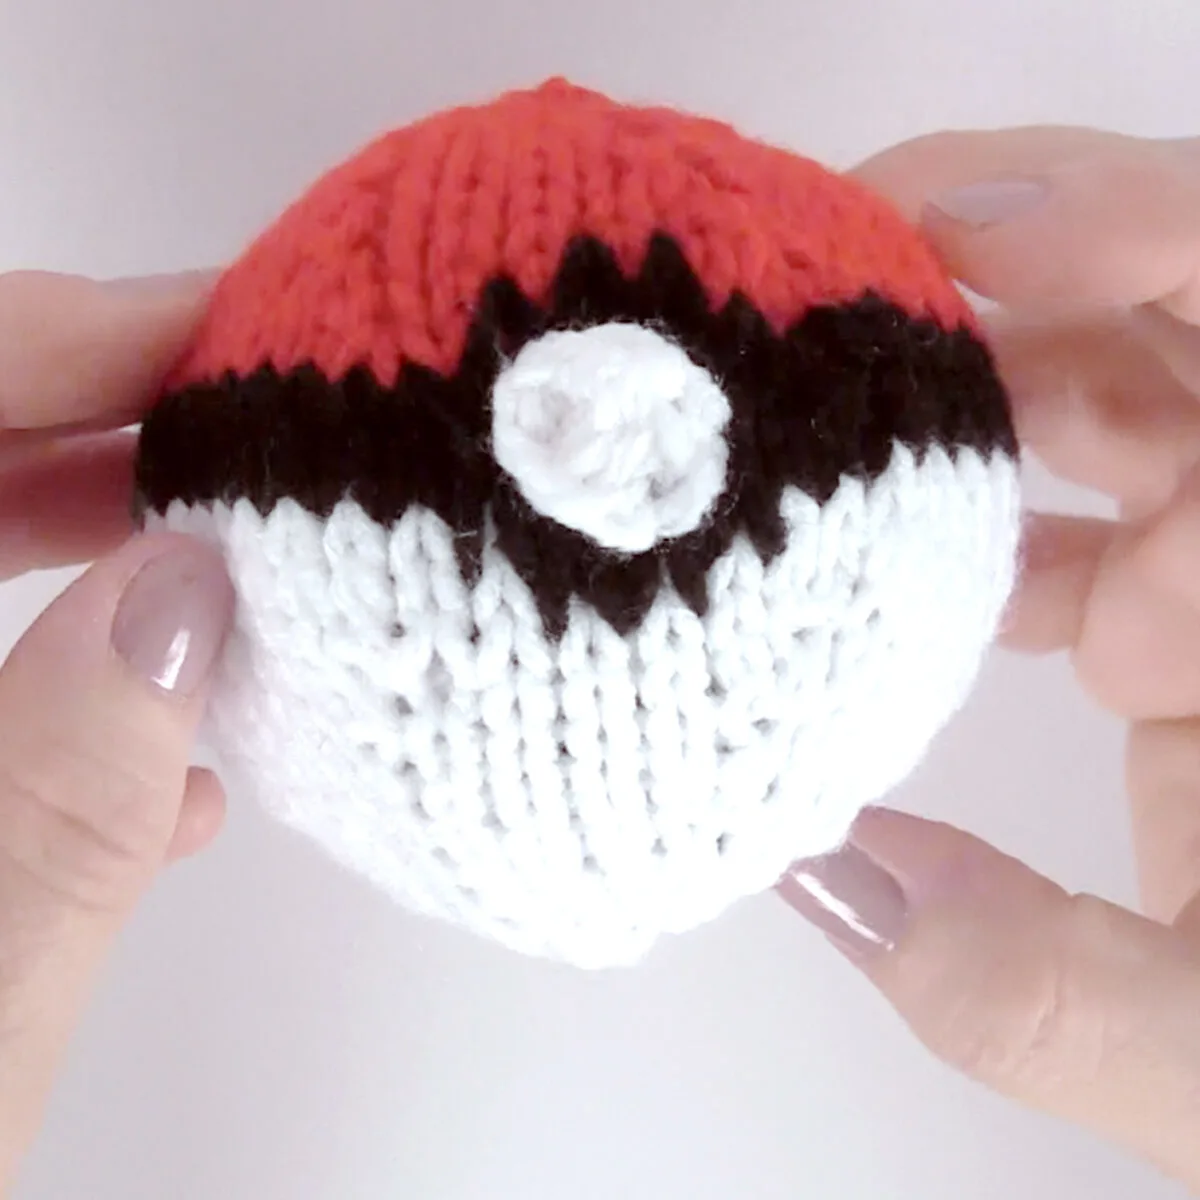 Knitted Poke Ball in white, red, and black yarn colors held by two hands.